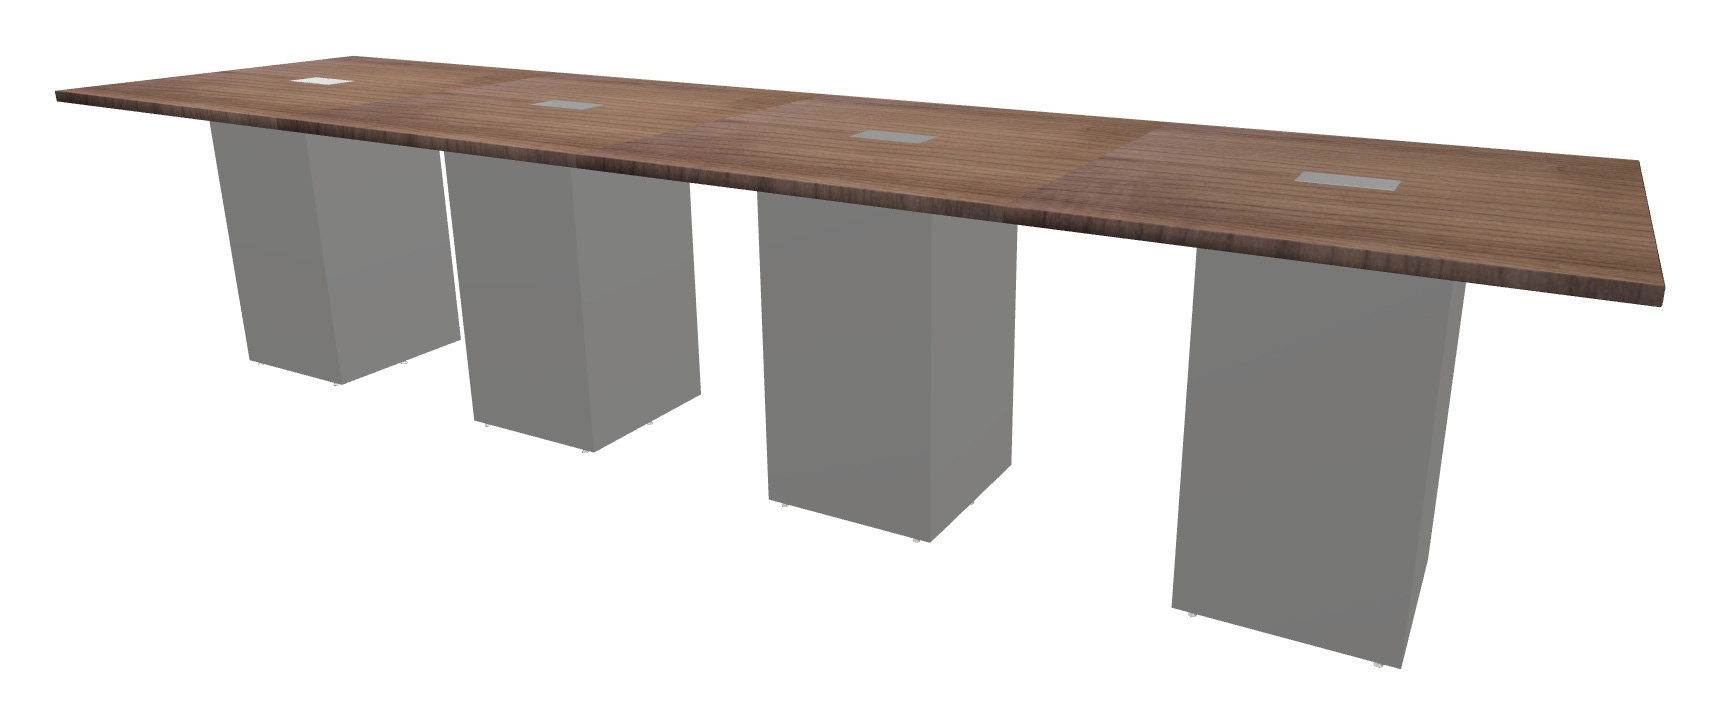 Standing Height Conference Table | stickhealthcare.co.uk